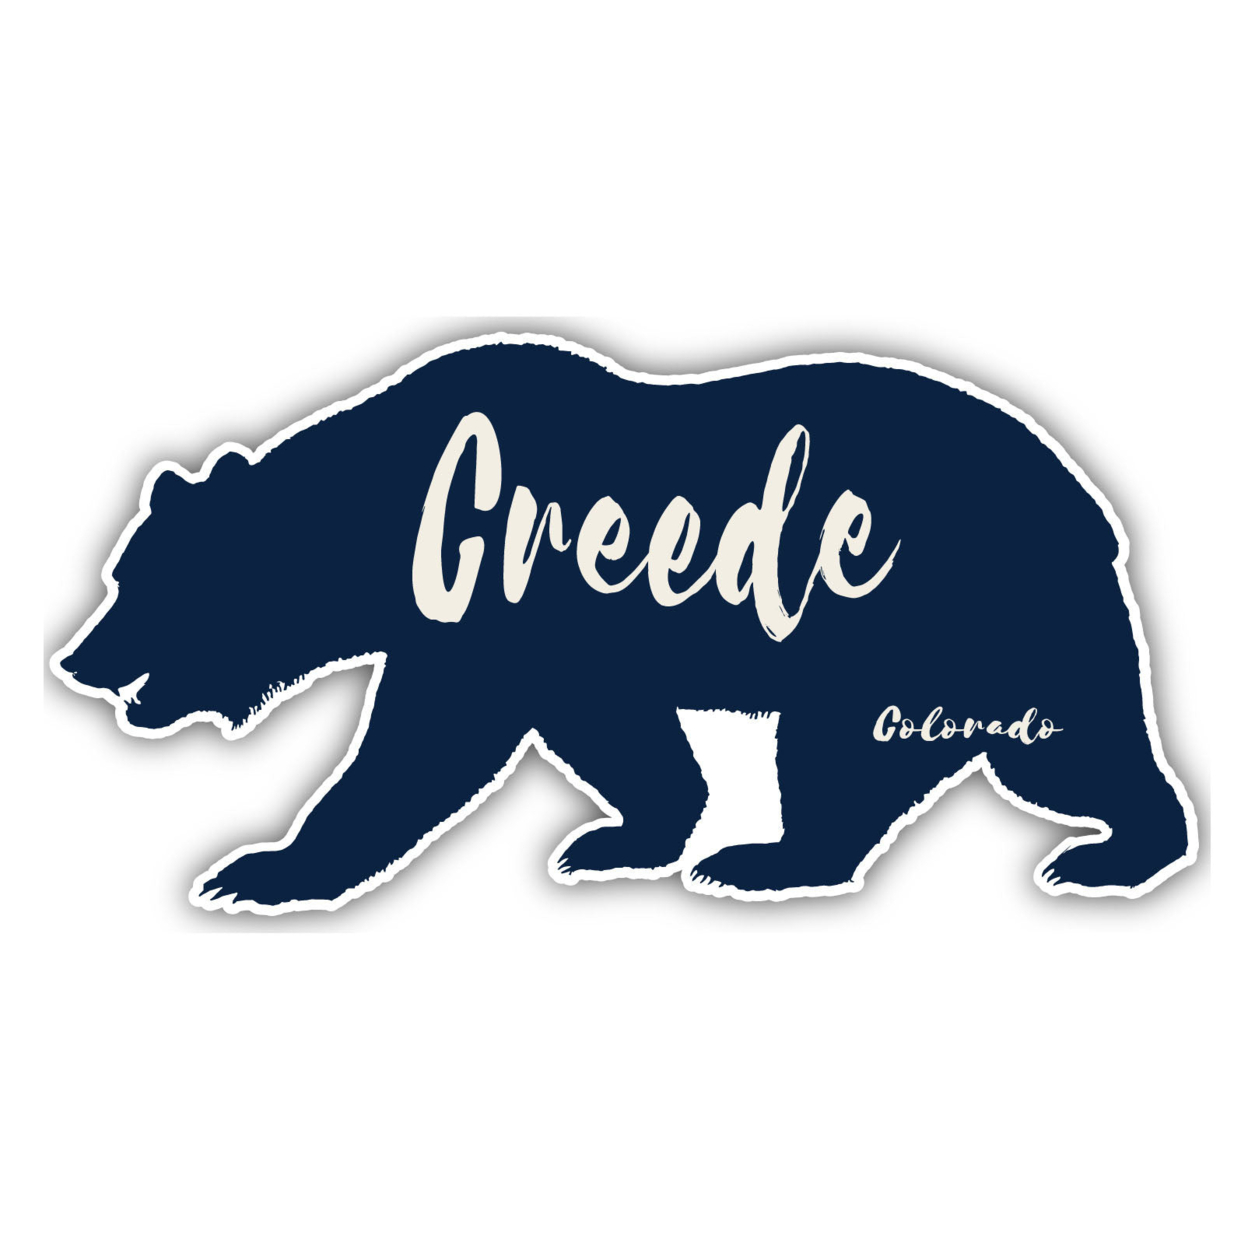 Creede Colorado Souvenir Decorative Stickers (Choose Theme And Size) - 4-Pack, 10-Inch, Bear